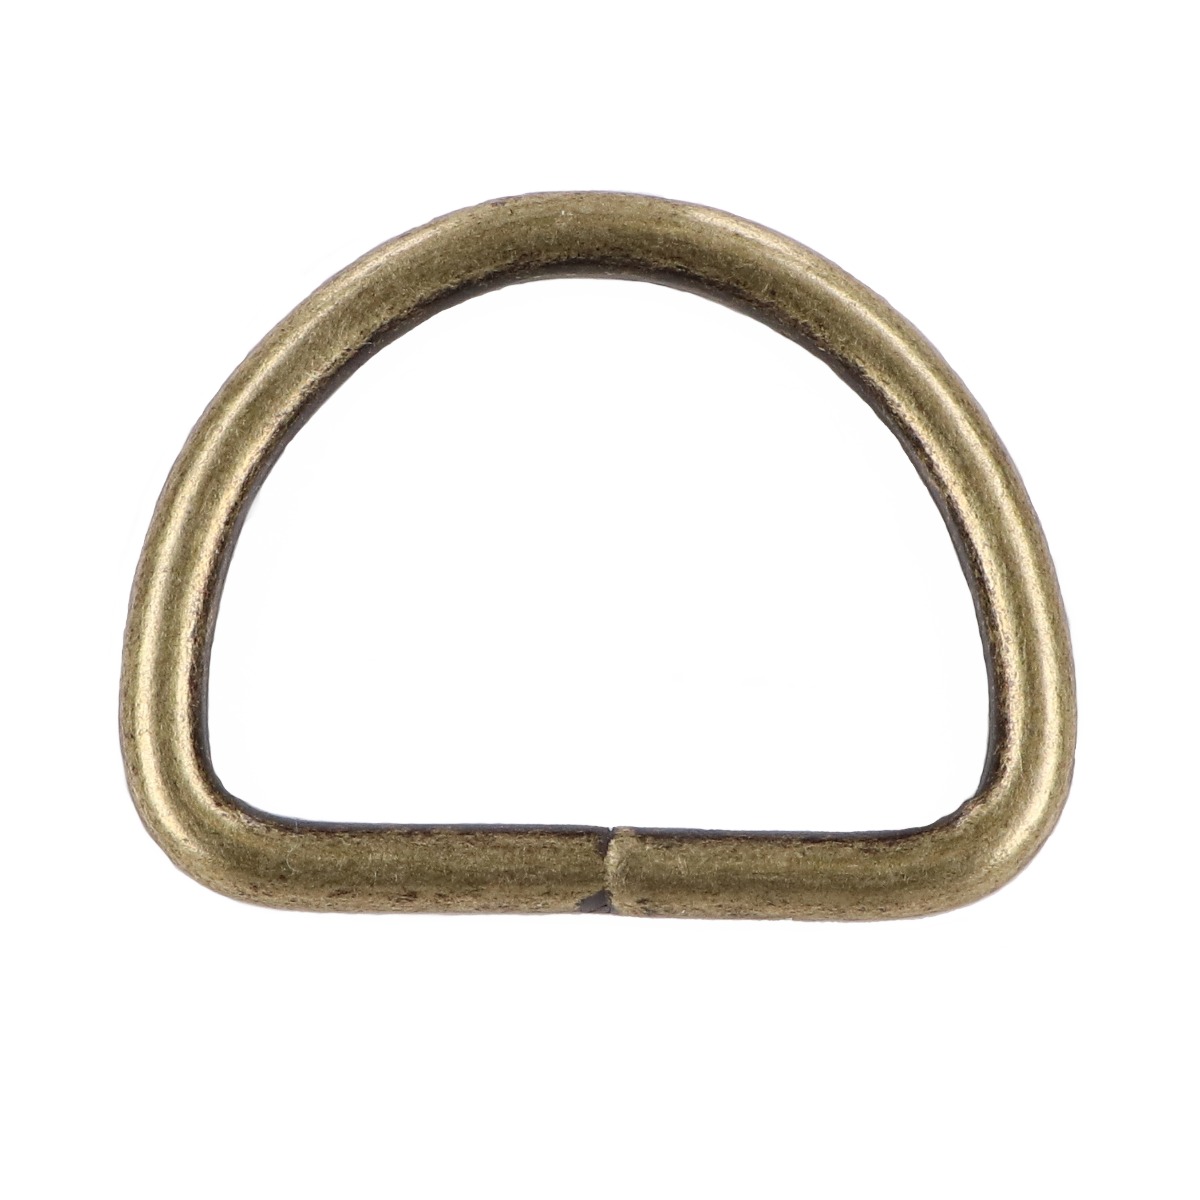 18mm 8US inner size Adjustable Ring Raw Brass 3300 ring23